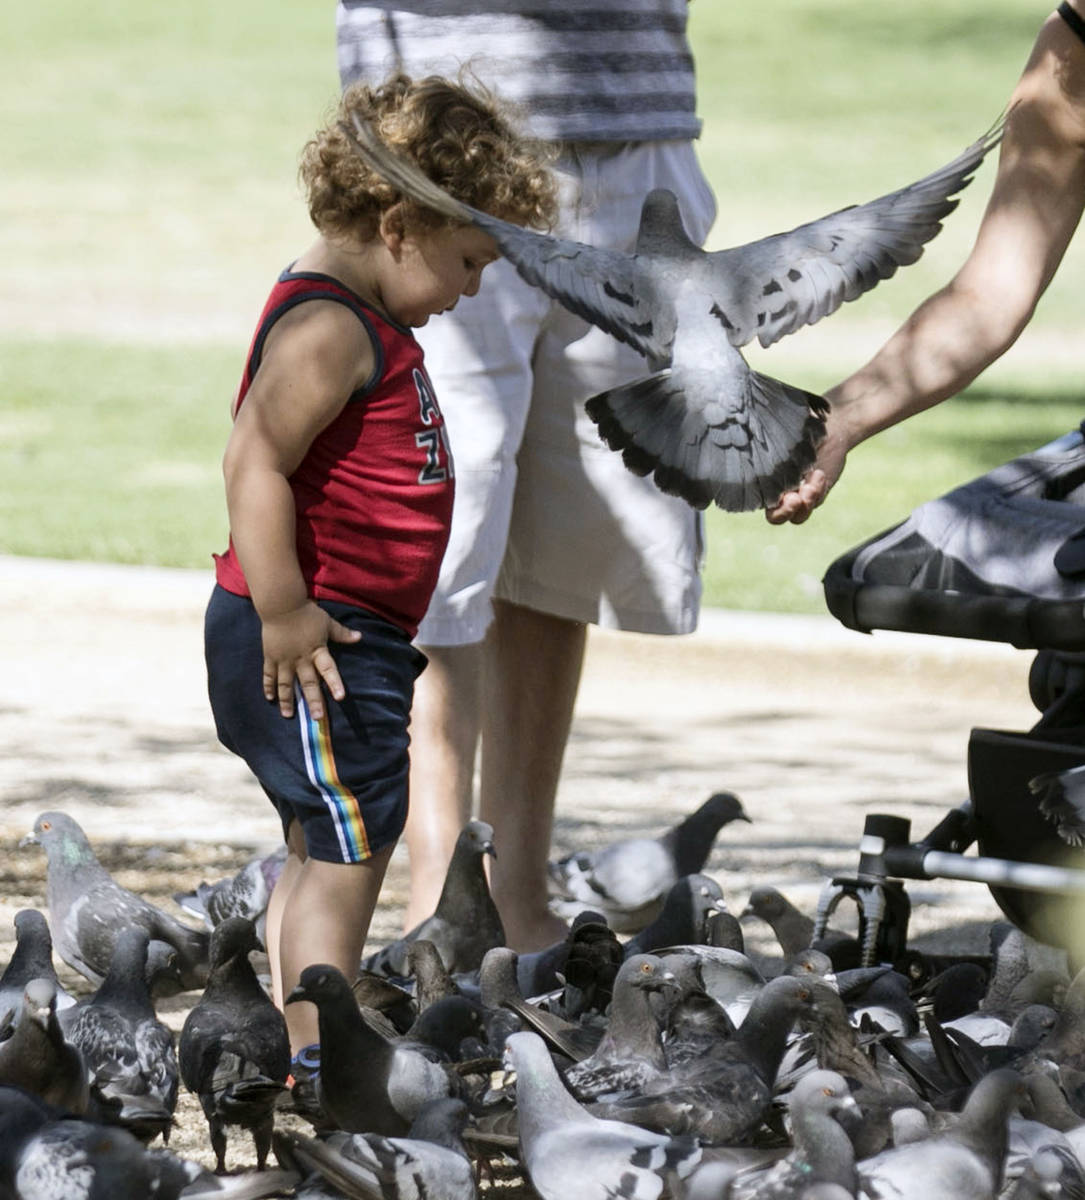 Erick Stetler, 2, watches as his grandmother, who declined to give her name, feeds birds at Sun ...